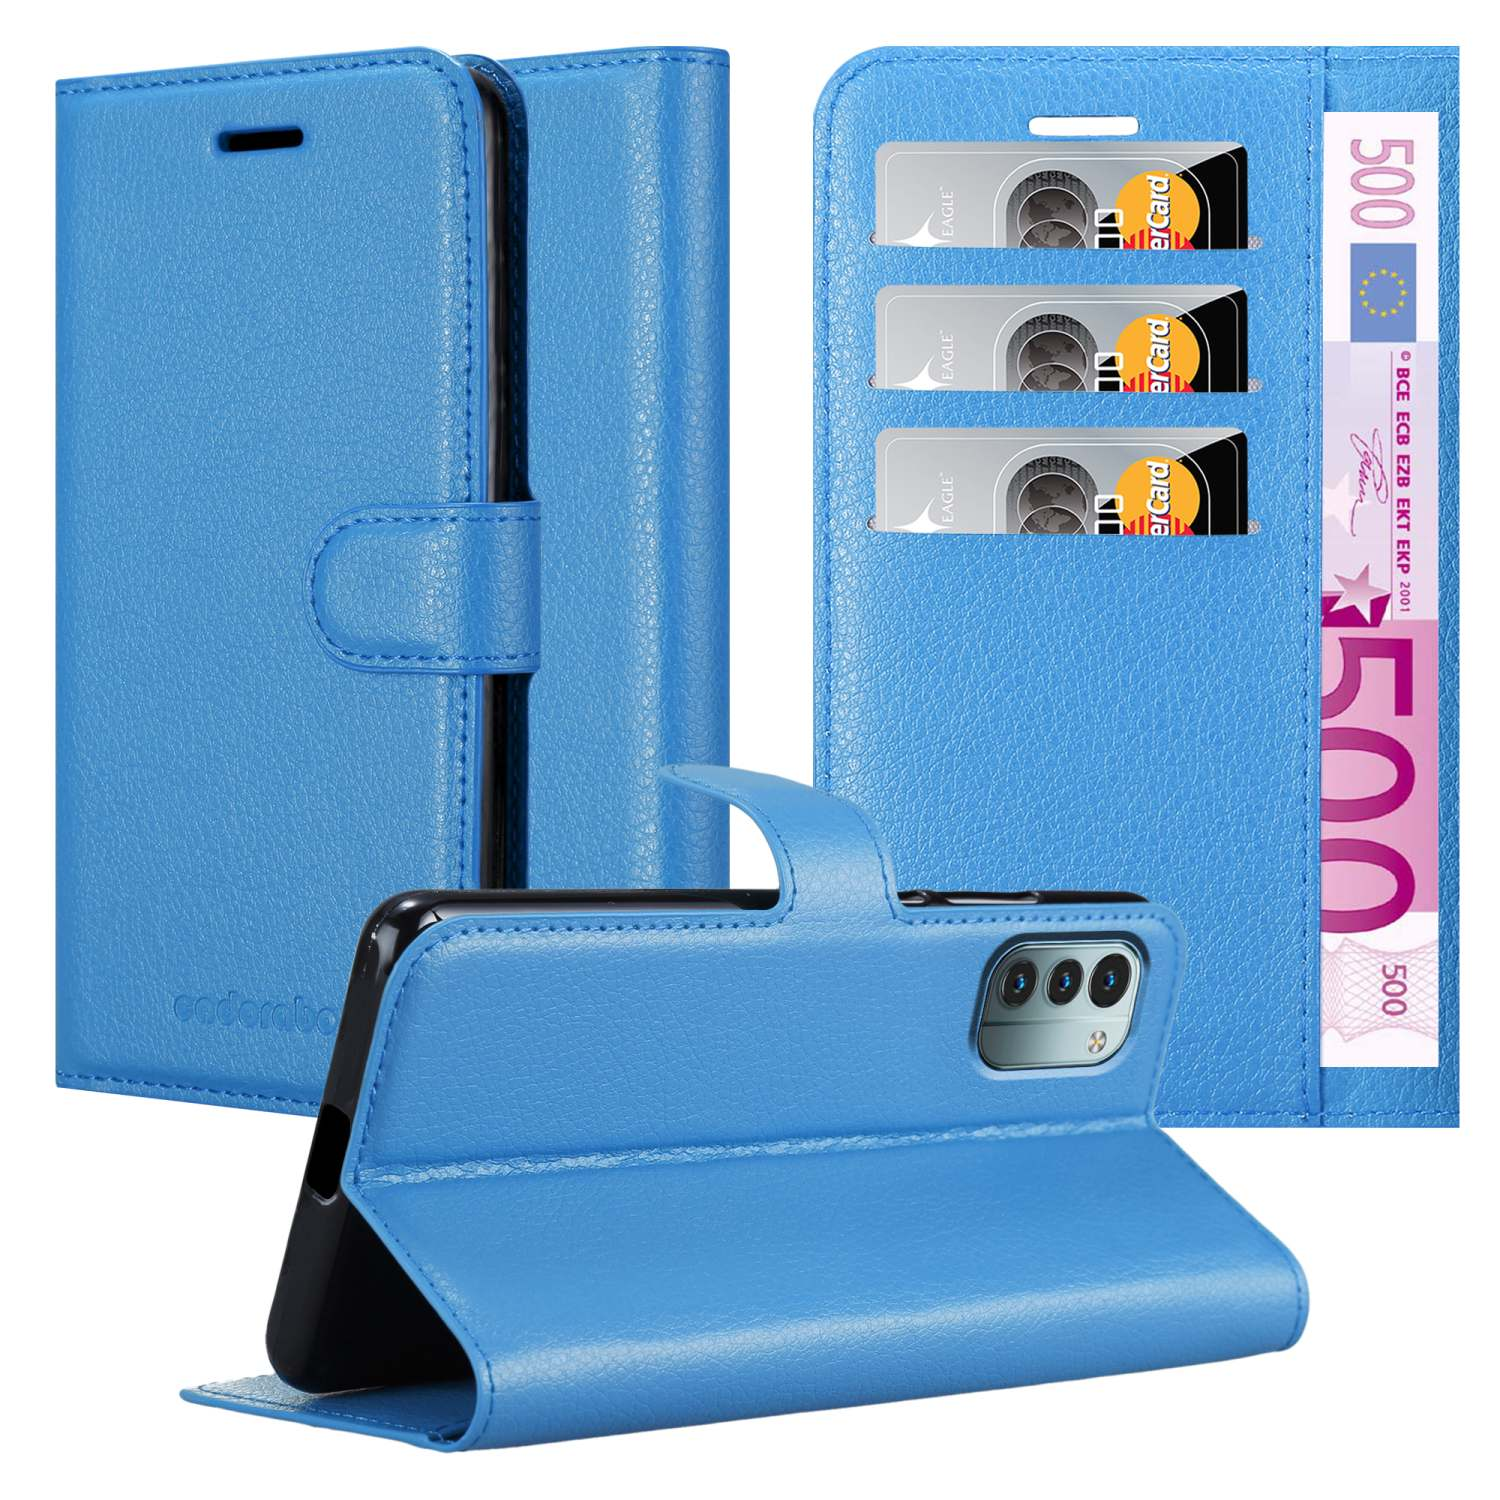 G21, BLAU Book / PASTELL Standfunktion, Nokia, Hülle CADORABO G11 Bookcover,